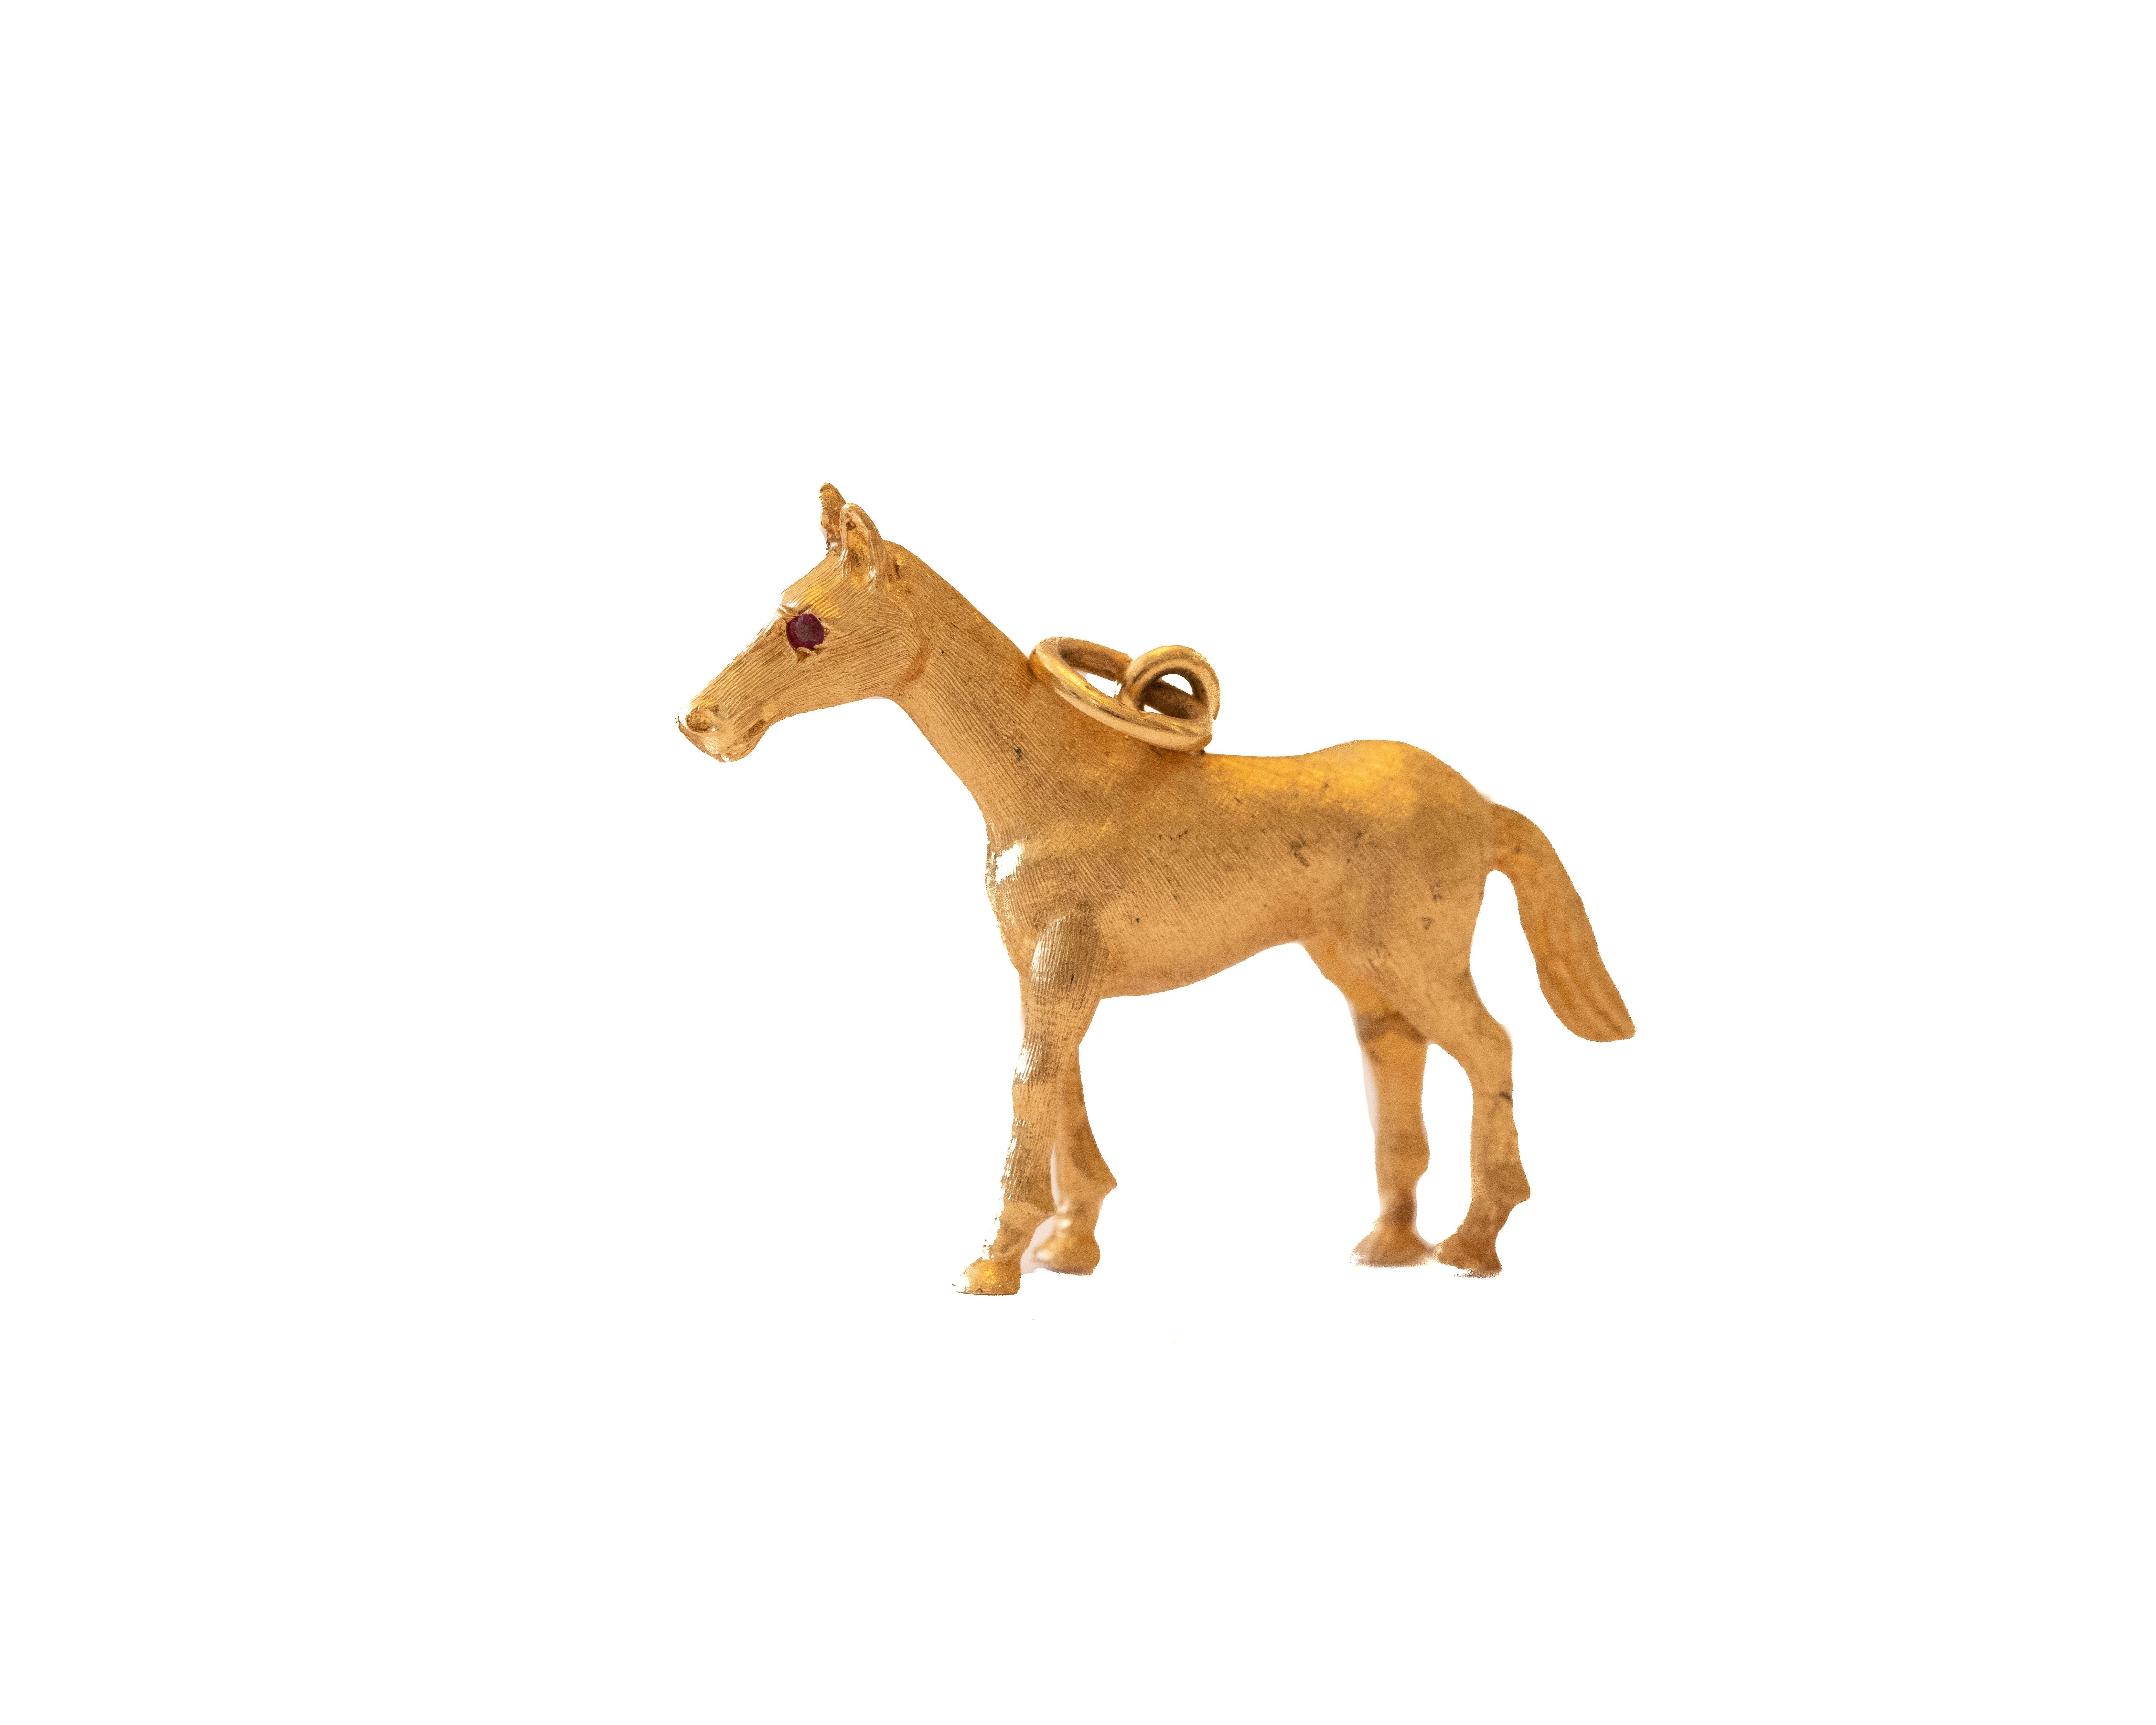 This cute 14K horse charm had a fun pop of color with the Ruby eyes. Perfect for the horse lover or charm collector in your life. 

Charm details:
Metal: 14 Karat Yellow Gold
Weight: 6.10 grams

Payment & Refund Details:
*More Pictures Available on